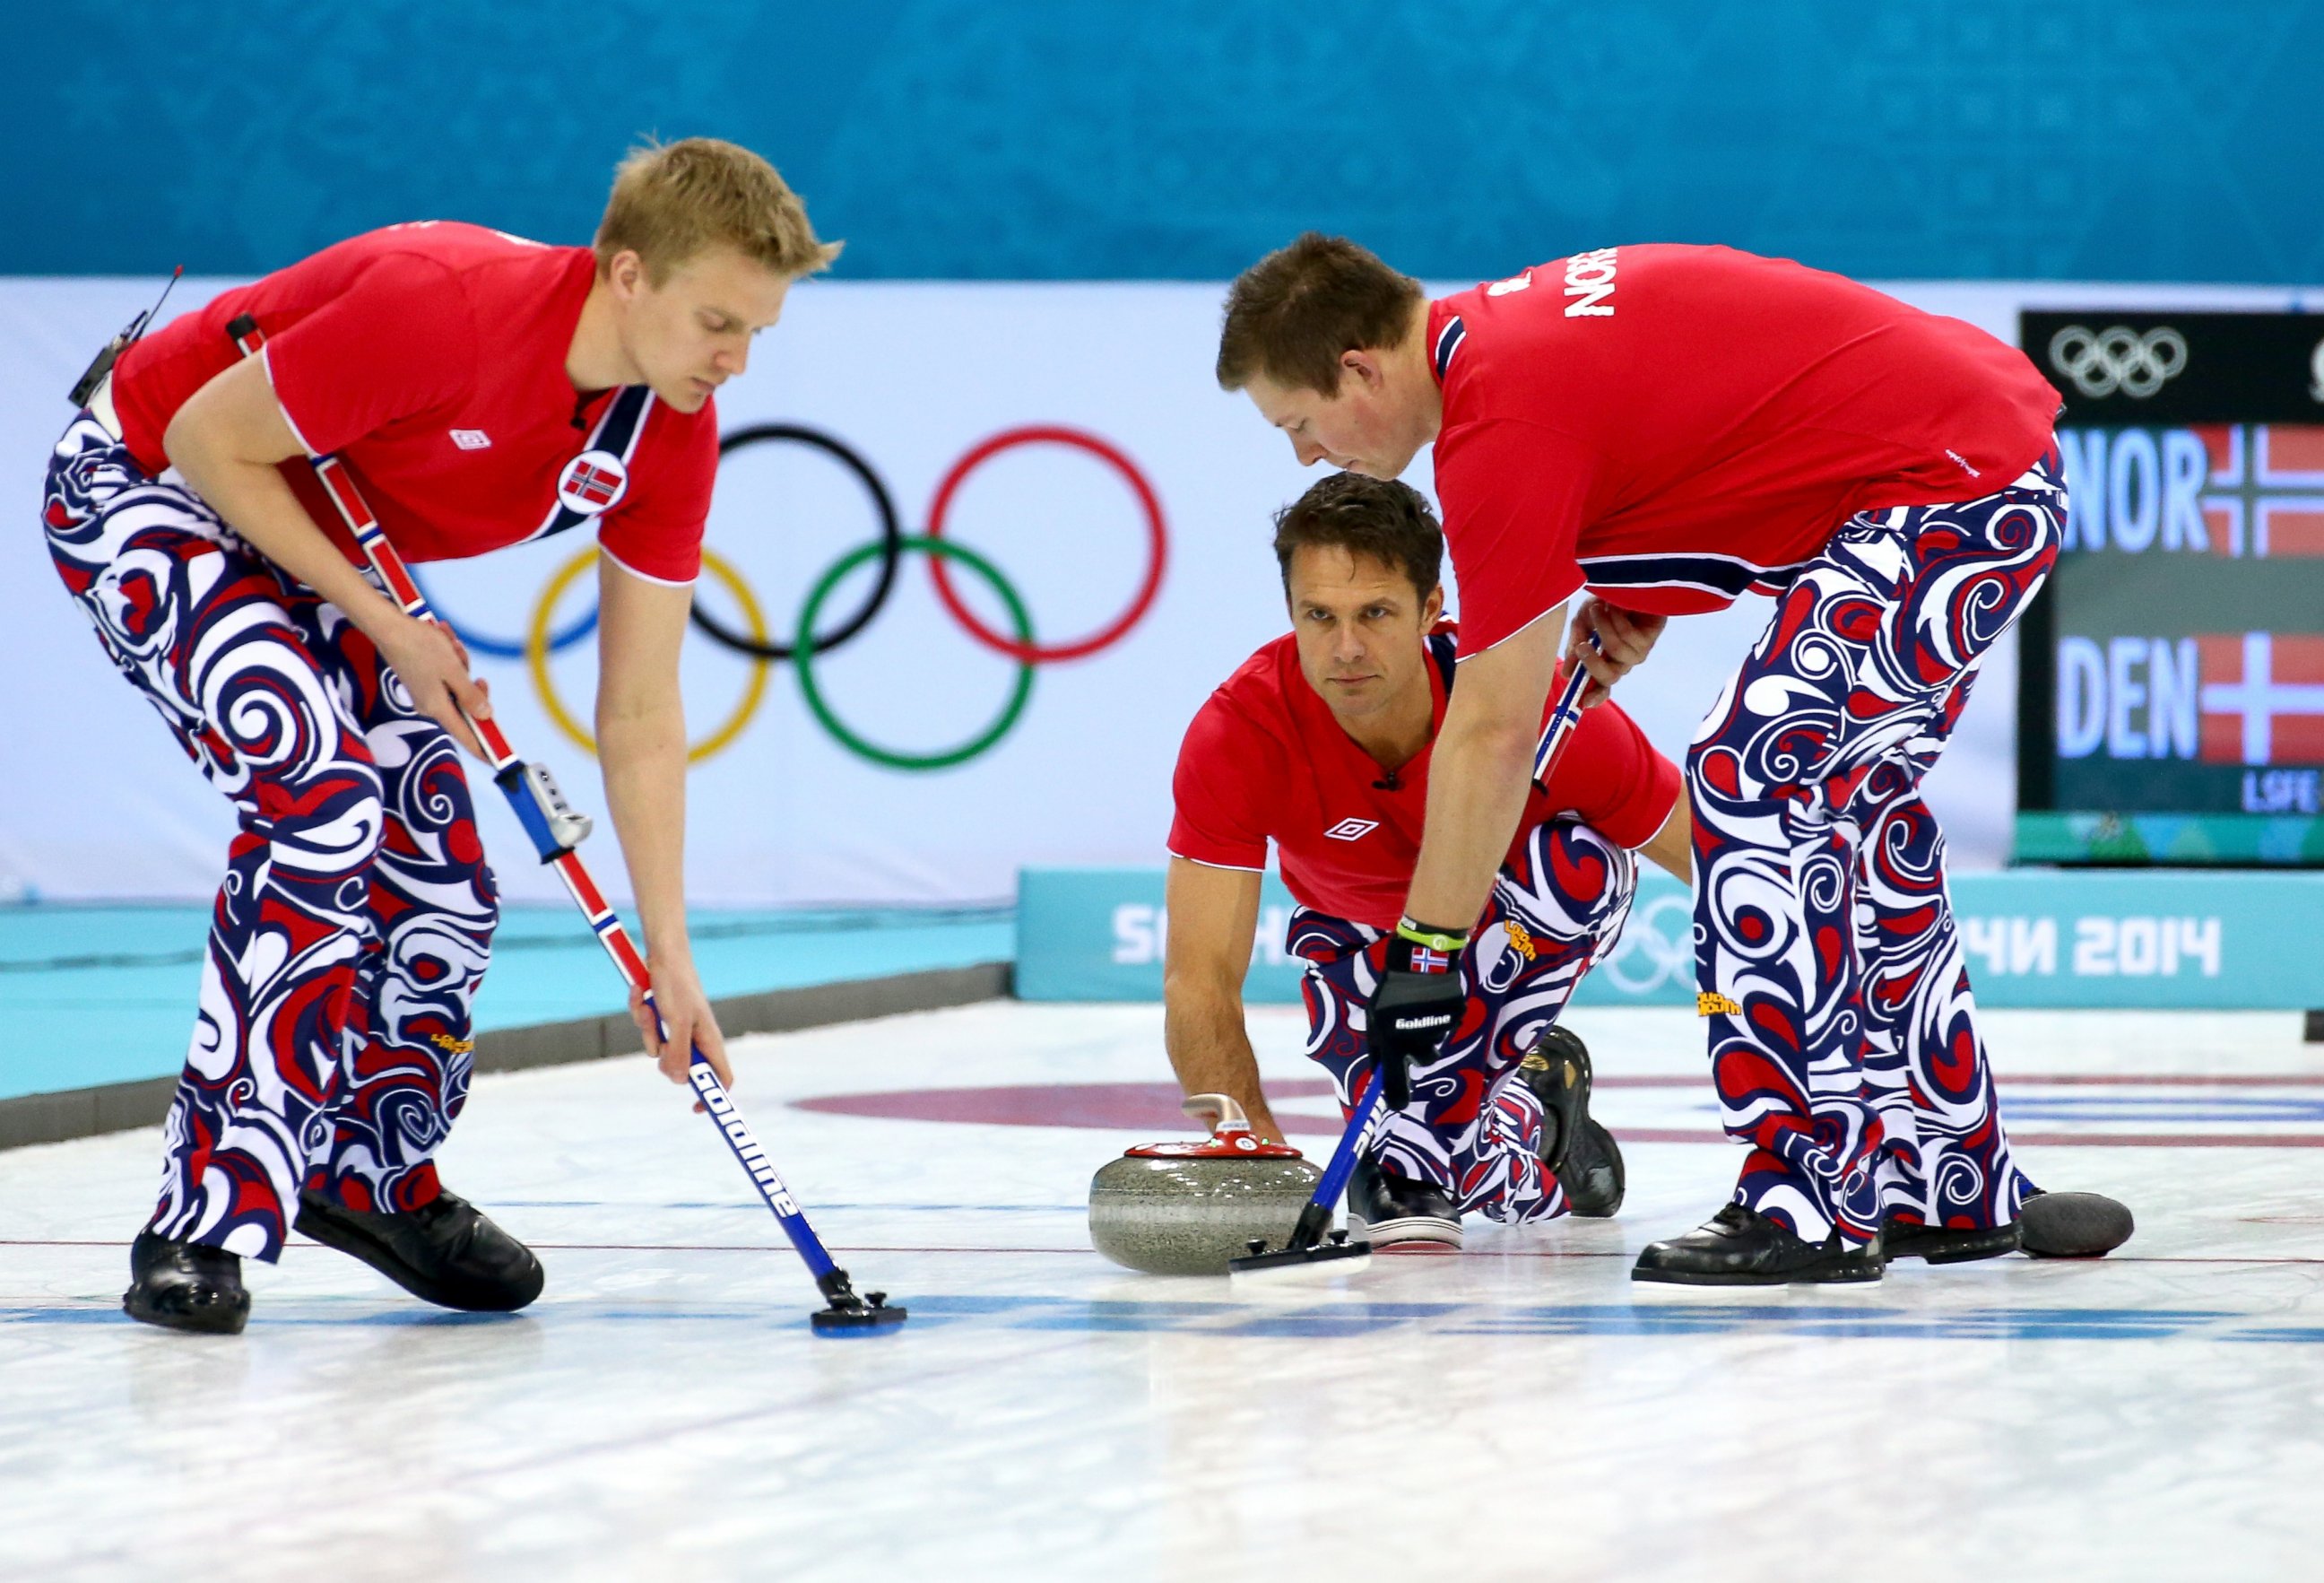 PHOTO: Jaavard Vad Petersson, Thomas Ulsrud and Christoffer Svae of Norway compete against Denmark during the Men's Curling Round Robin on Feb. 17, 2014.  